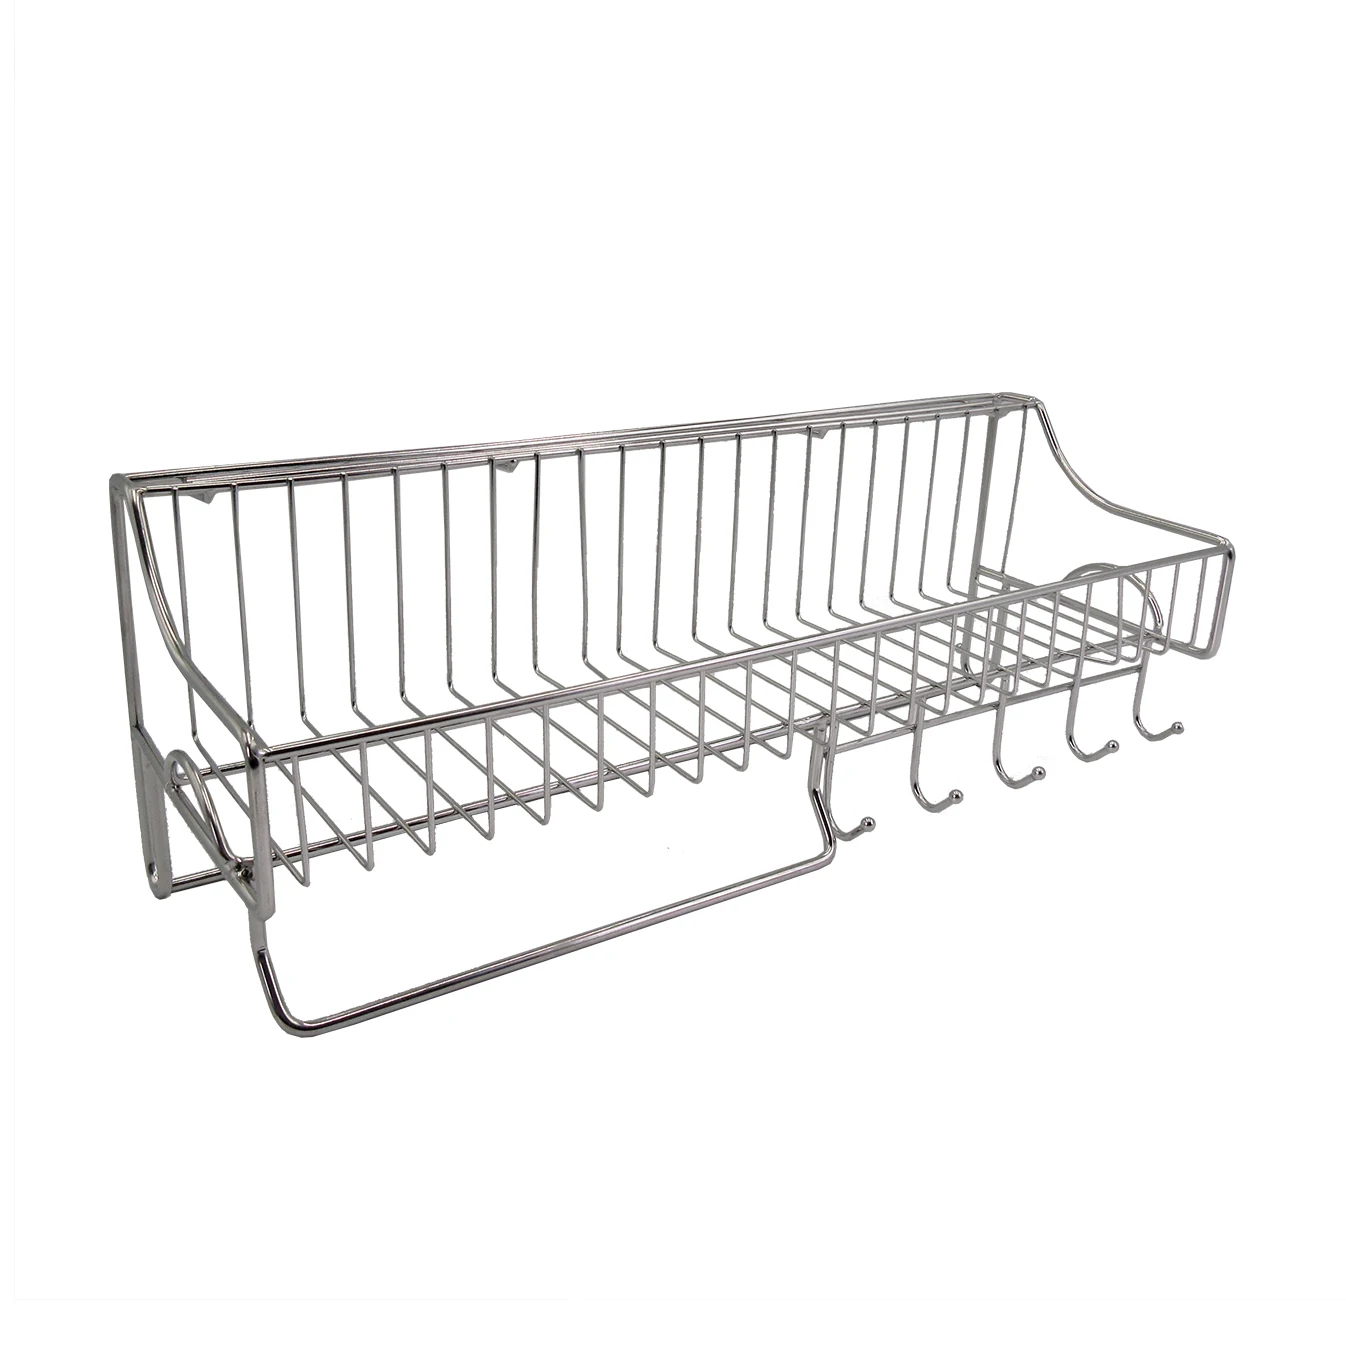 Stainless Steel Wall Mounted Dish Drainer Drying Rack Bowl Plate